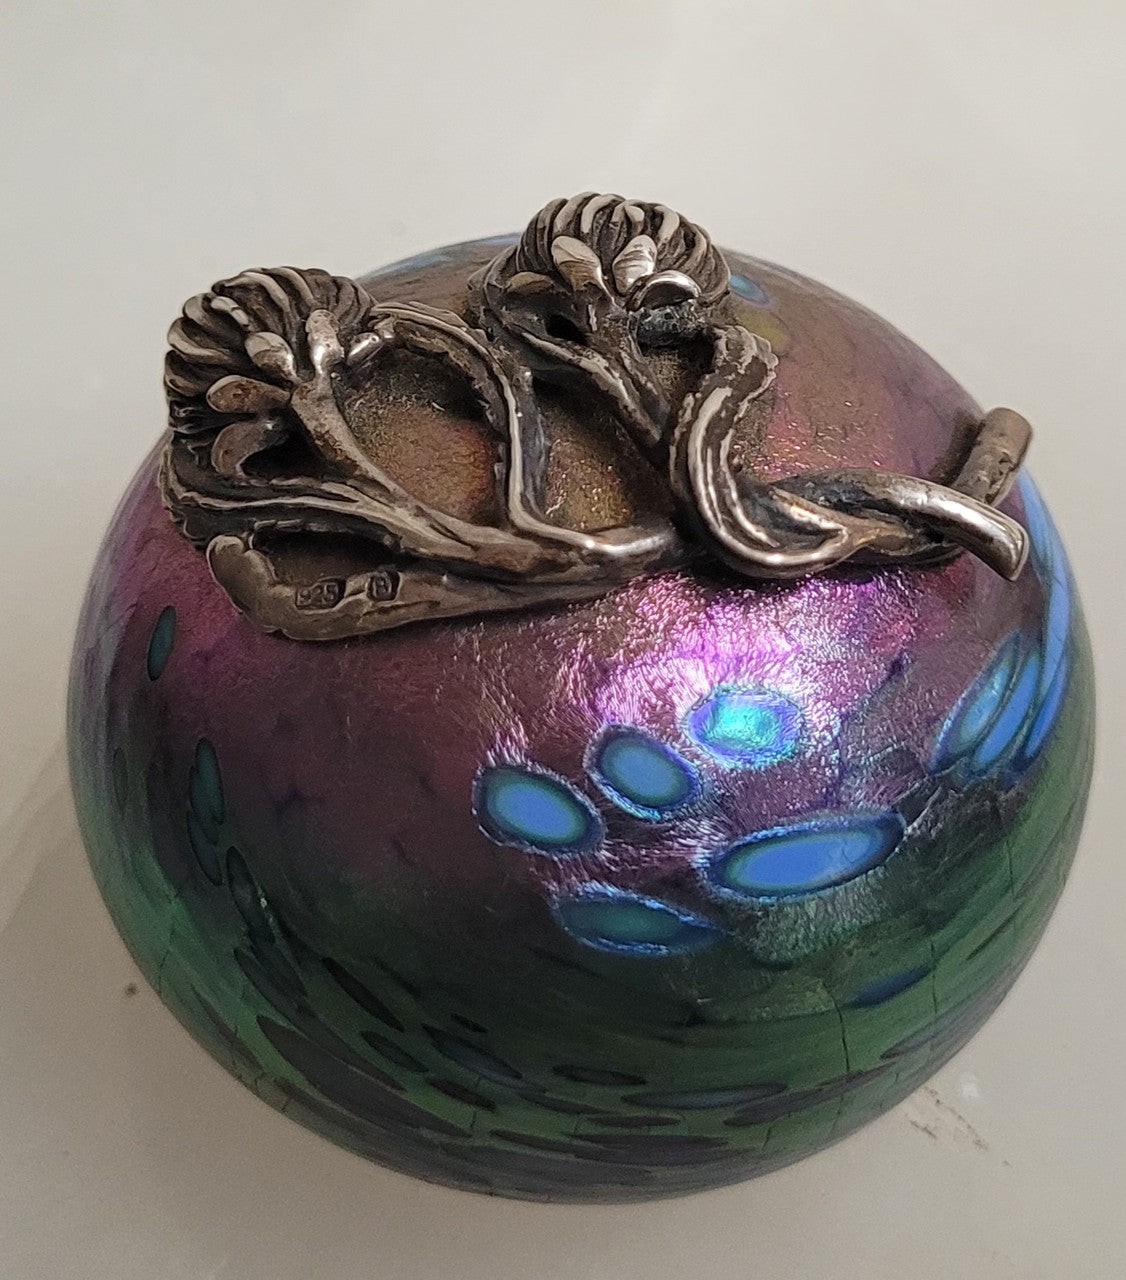 Vintage Iridescent Colin Heaney Paperweight with Sterling Silver Waratah flower by Suzanne Brett